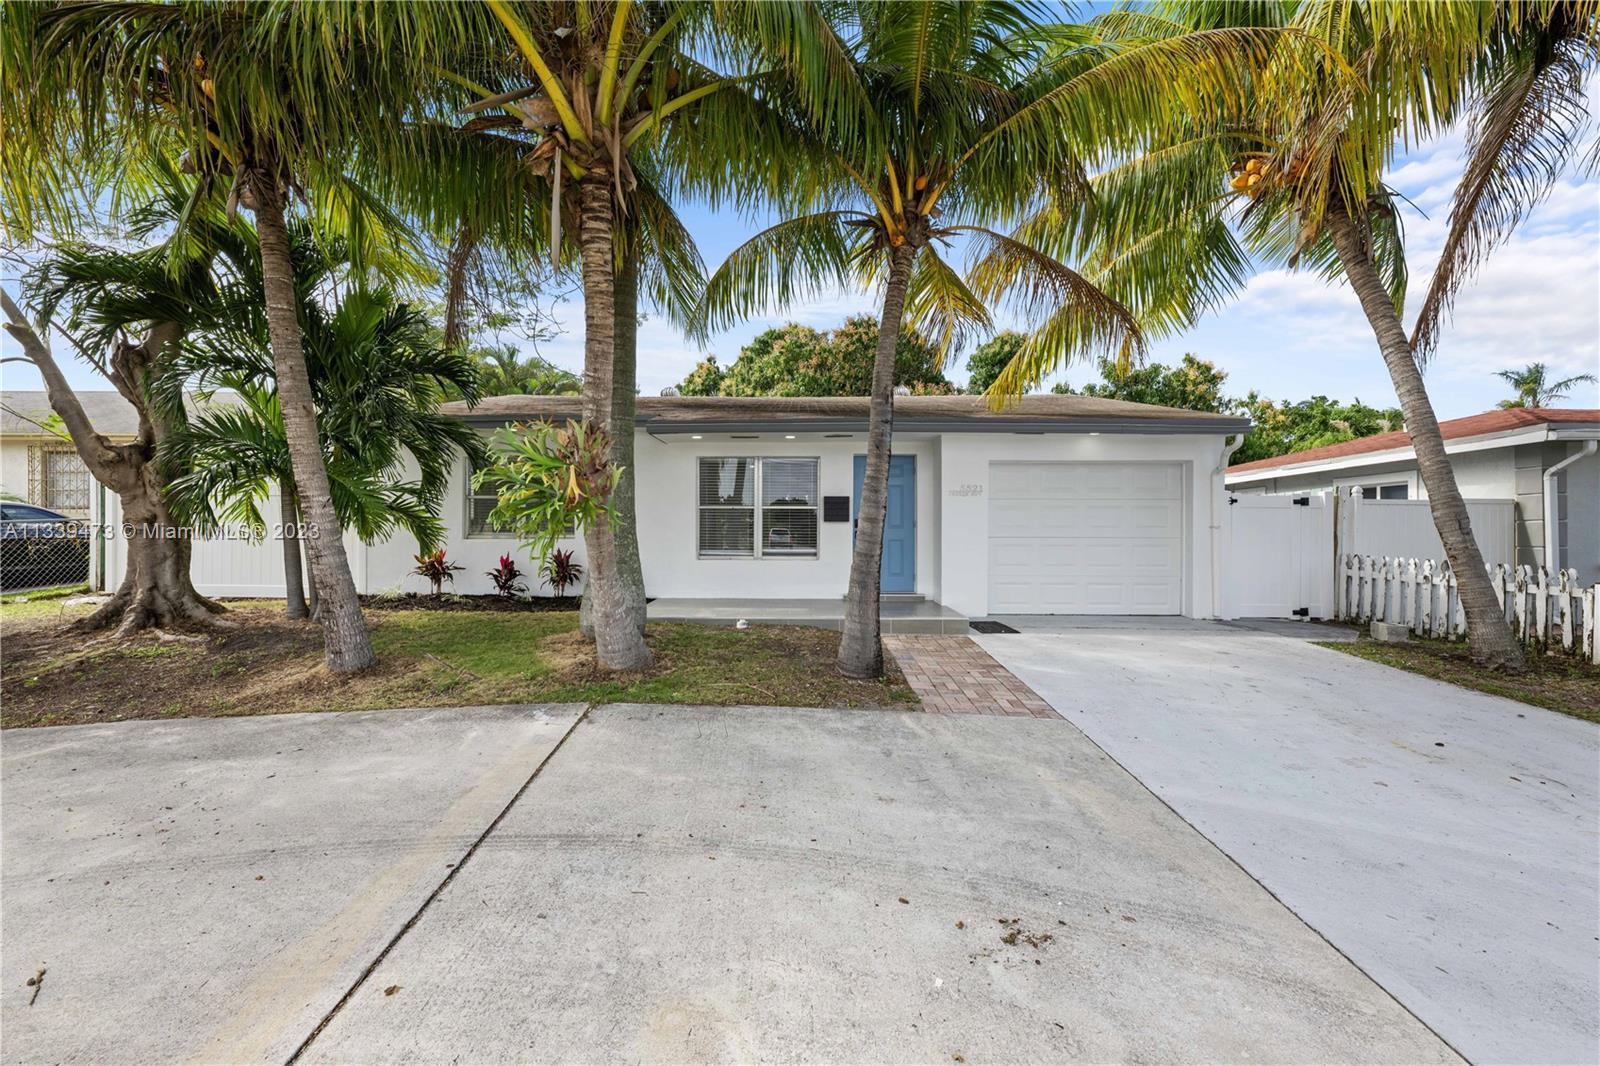 Completely remodeled single family home in fantastic West Palm location.  Walking distance to Publix